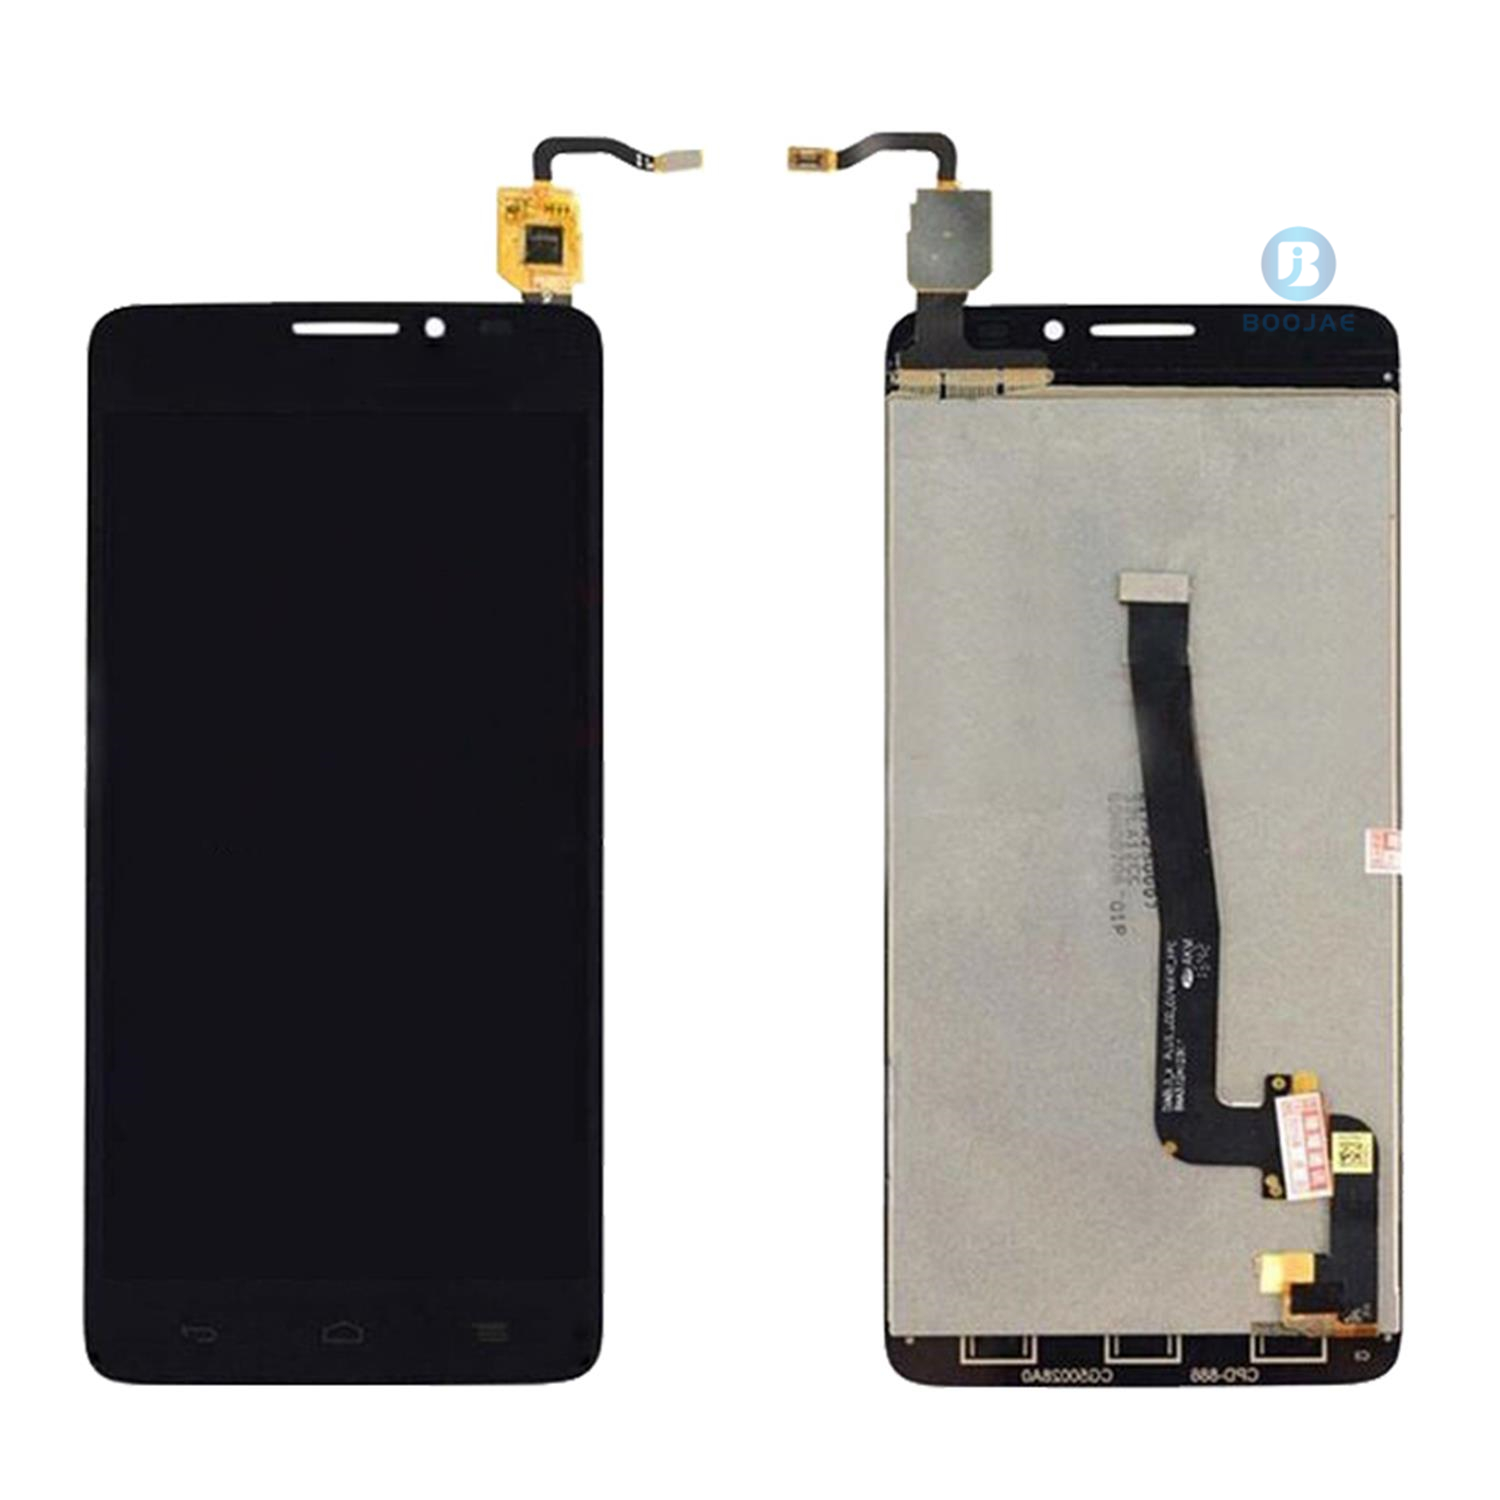 Alcatel 6043 LCD Screen Display, Lcd Assembly Replacement